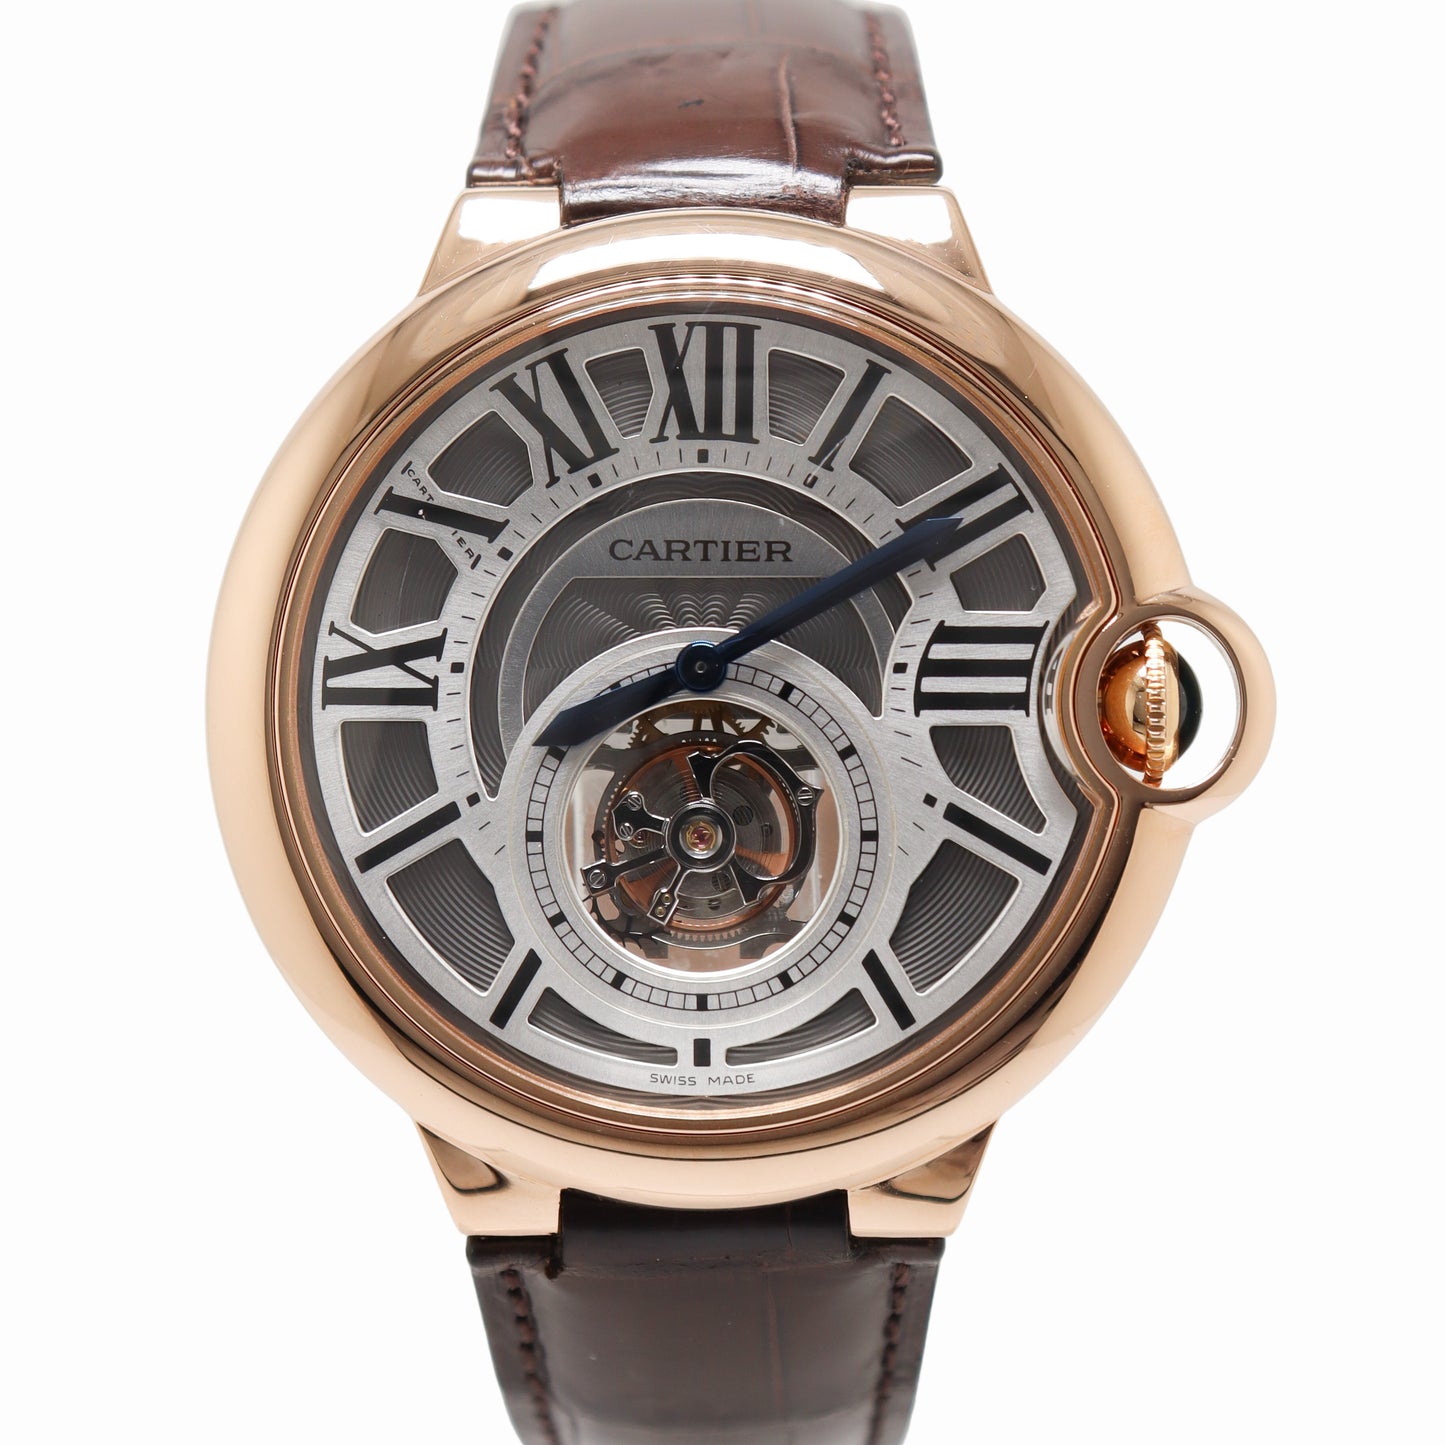 Cartier Ballon Bleu Flying Tourbillon 46mm Rose Gold Slate-Colored Galvanic Guilloche Dial Watch Reference# W6920001 - Happy Jewelers Fine Jewelry Lifetime Warranty